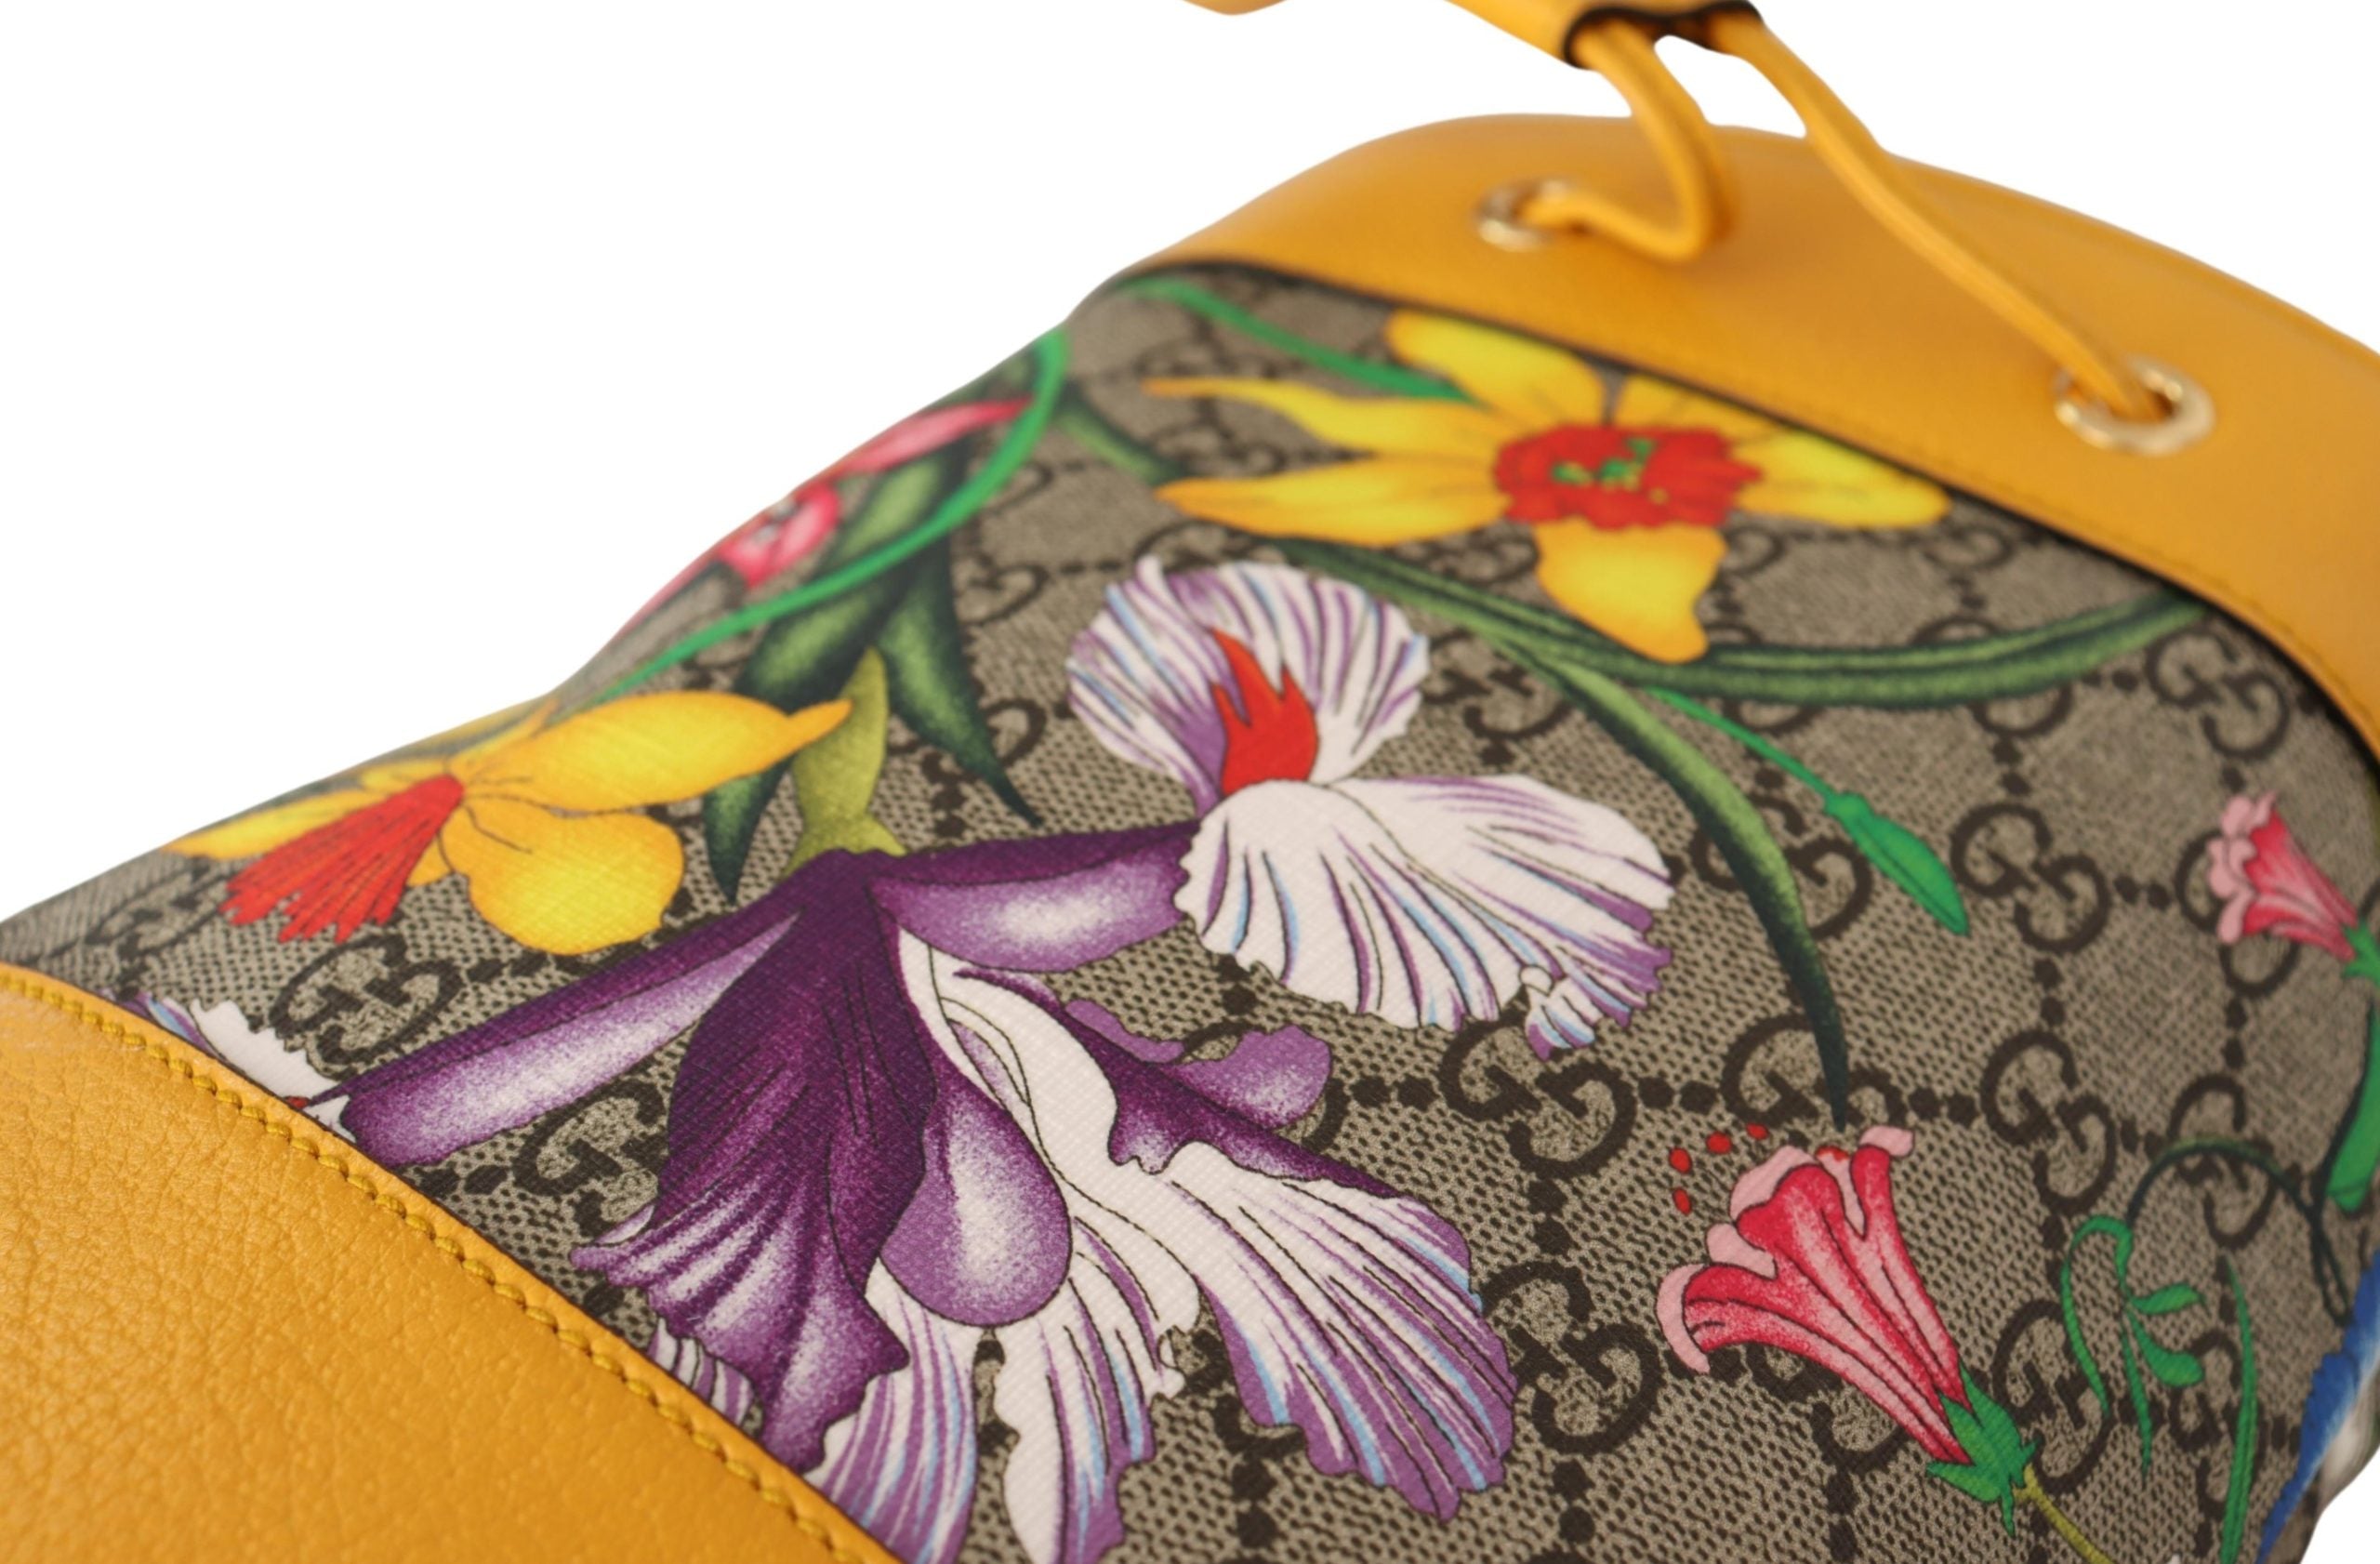 Yellow Leather & Canvas Ophidia Flora Bucket Shoulder Bag